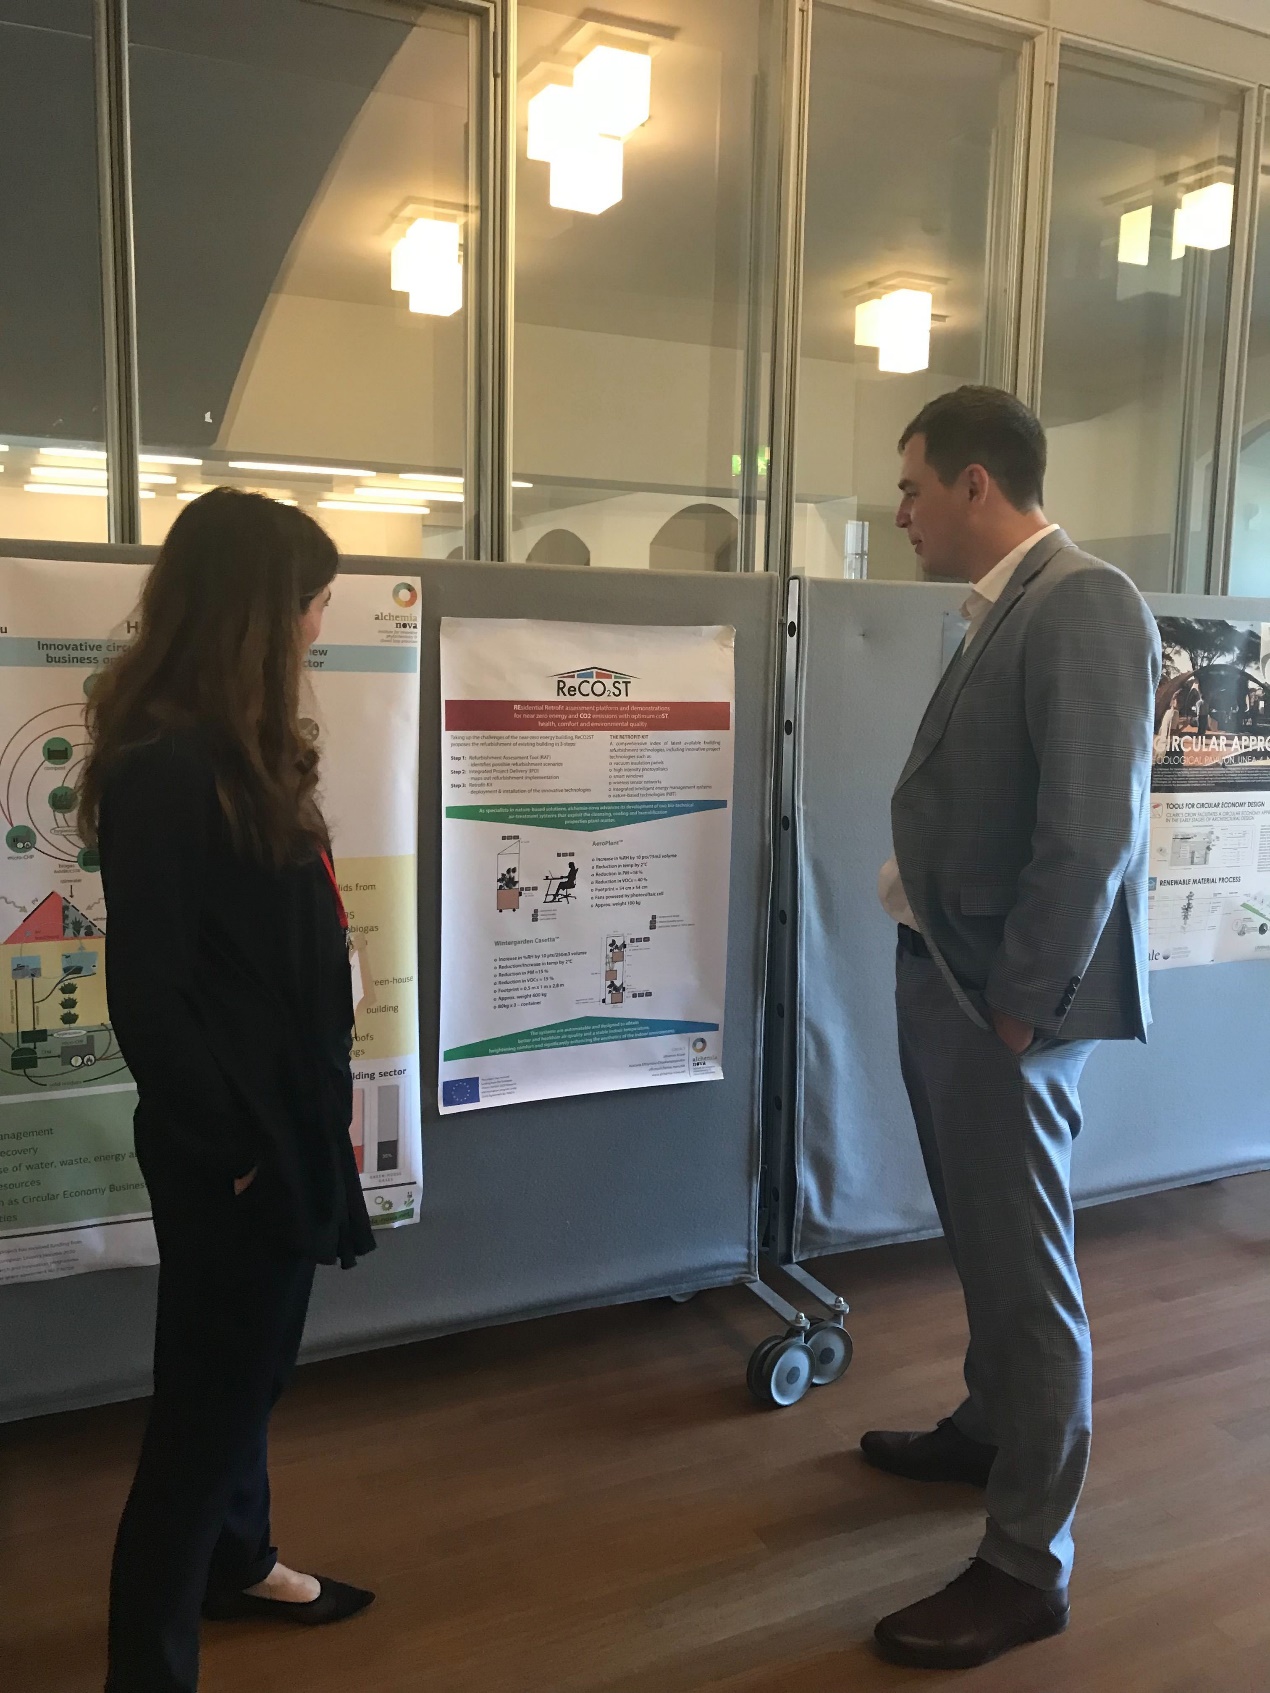 Alchemia-nova participated at the World Circular Economy Forum 2019 (WCEF2019) in Helsinki, Finland 3-5 June 2019 with a RECO2ST poster at the side event “Construction and Circular Economy” organized by the Ministry of Environment of Finland and the Green Building Council Finland.